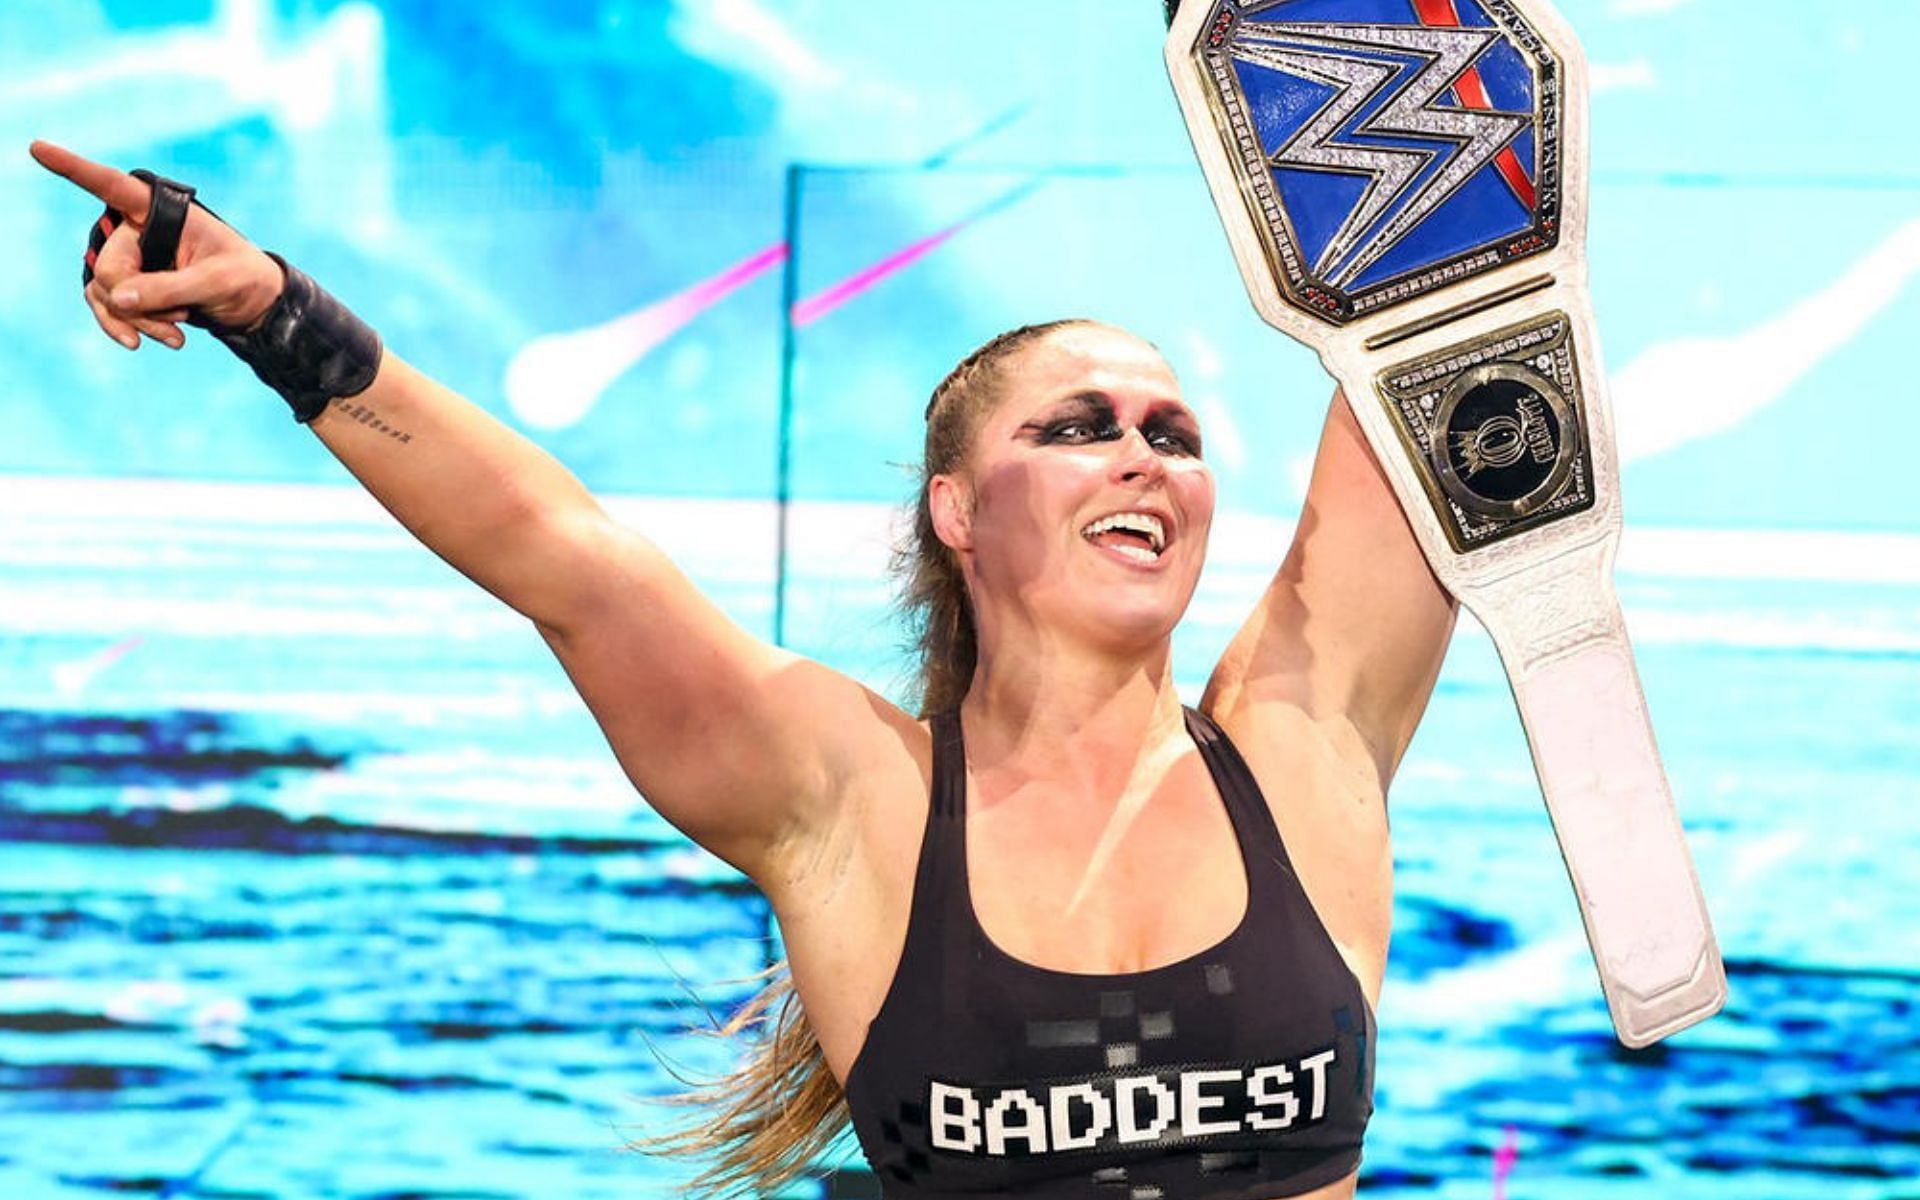 Ronda Rousey is a former SmackDown Women